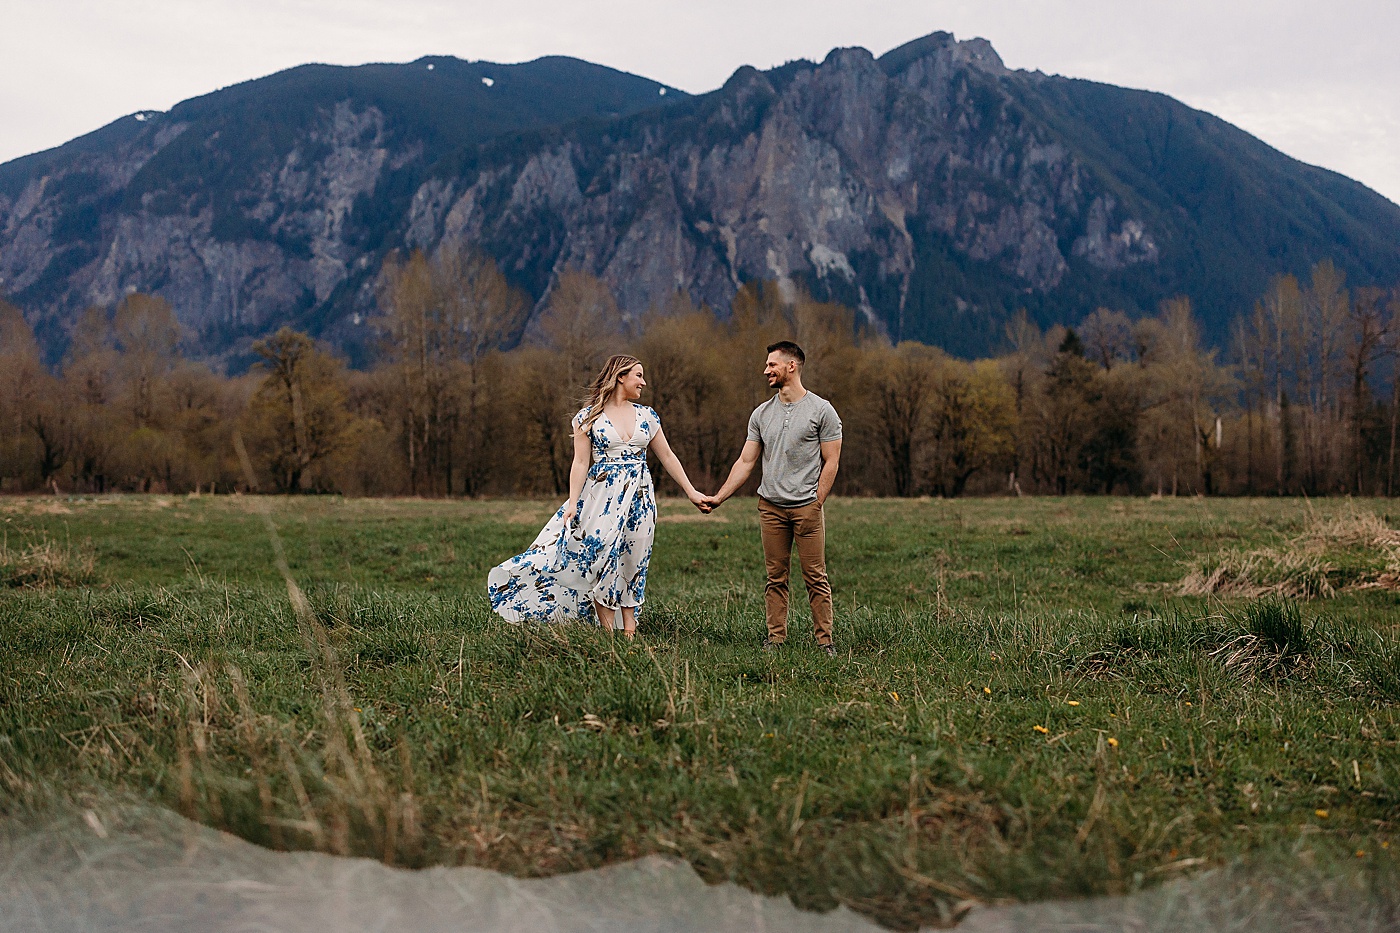 PNW engagement session with mountain views | Photo by Megan Montalvo Photography